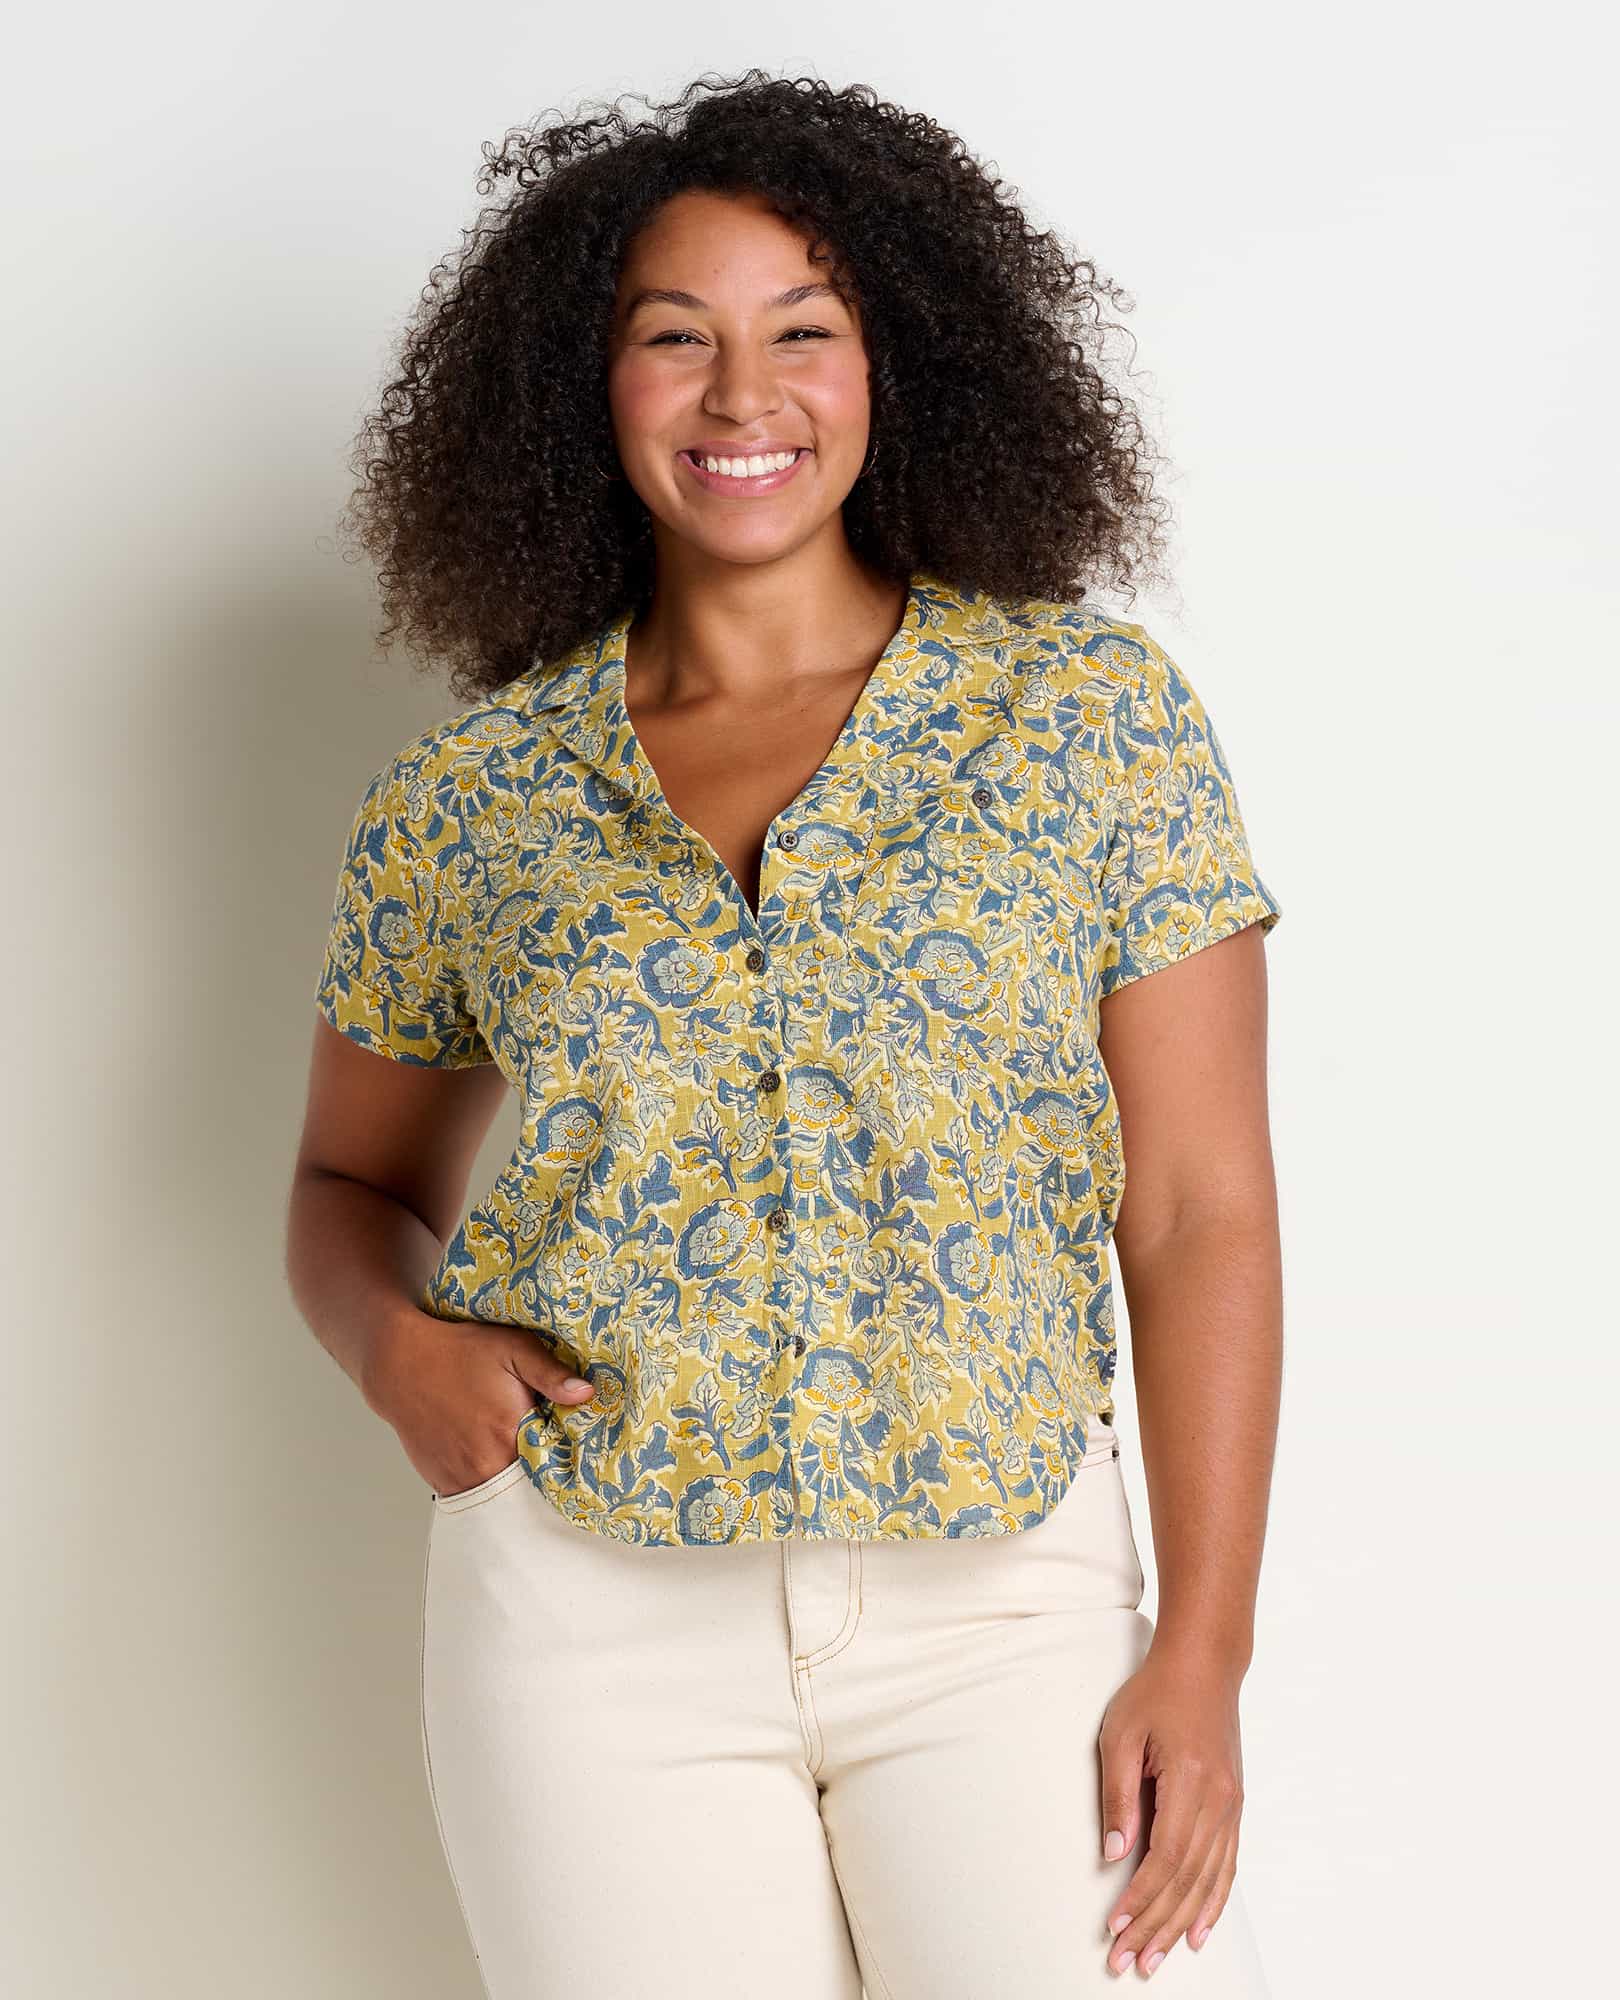 File:Work Outfit- Short Sleeved Cardigan, Floral Print Blouse